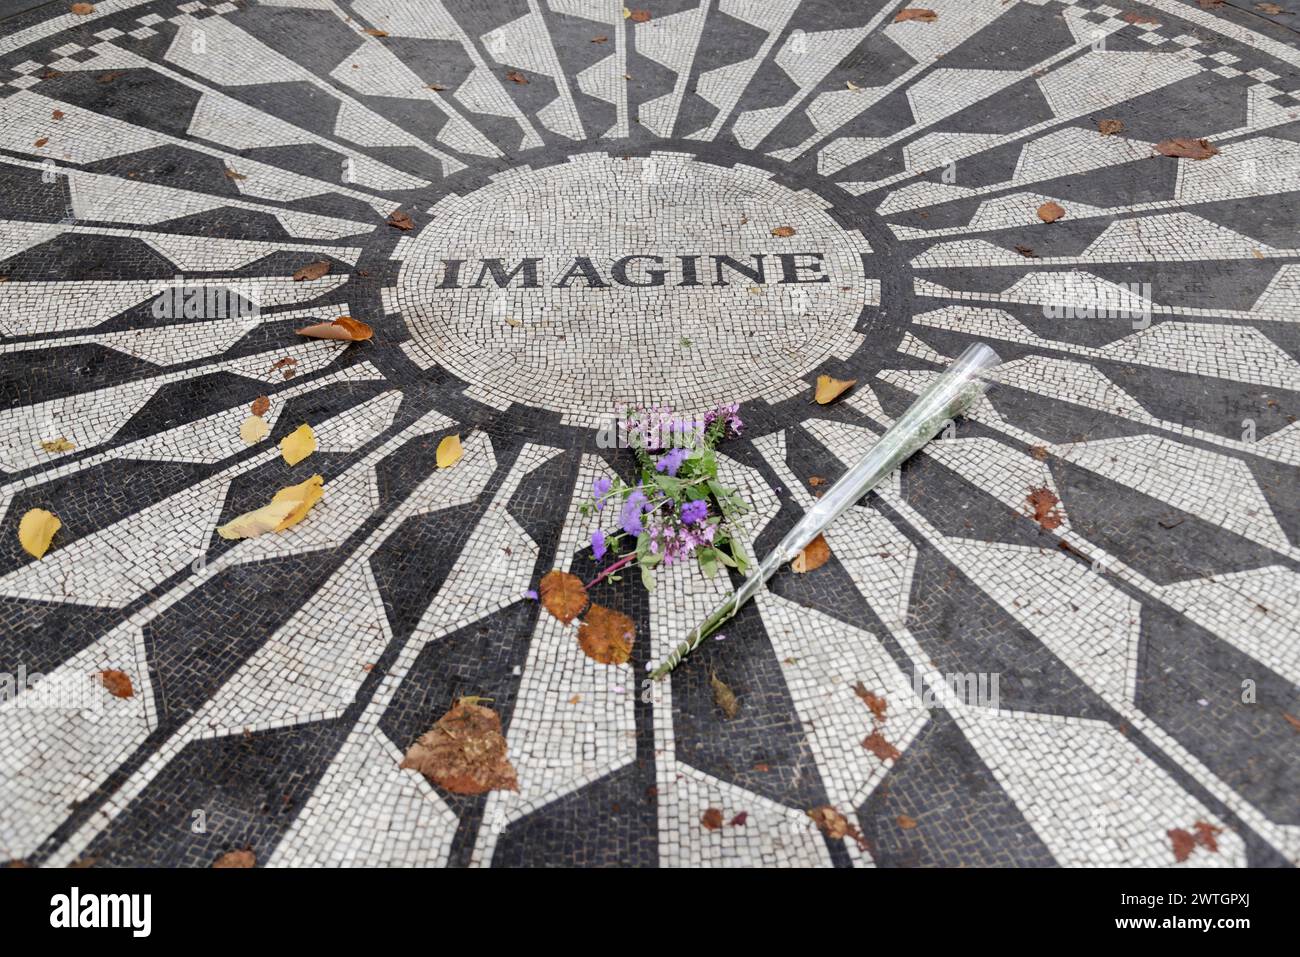 Central Park, A mosaic in honour of John Lennon with the word 'Imagine' and flowers, Manhattan, New York City, New York, USA, North America Stock Photo